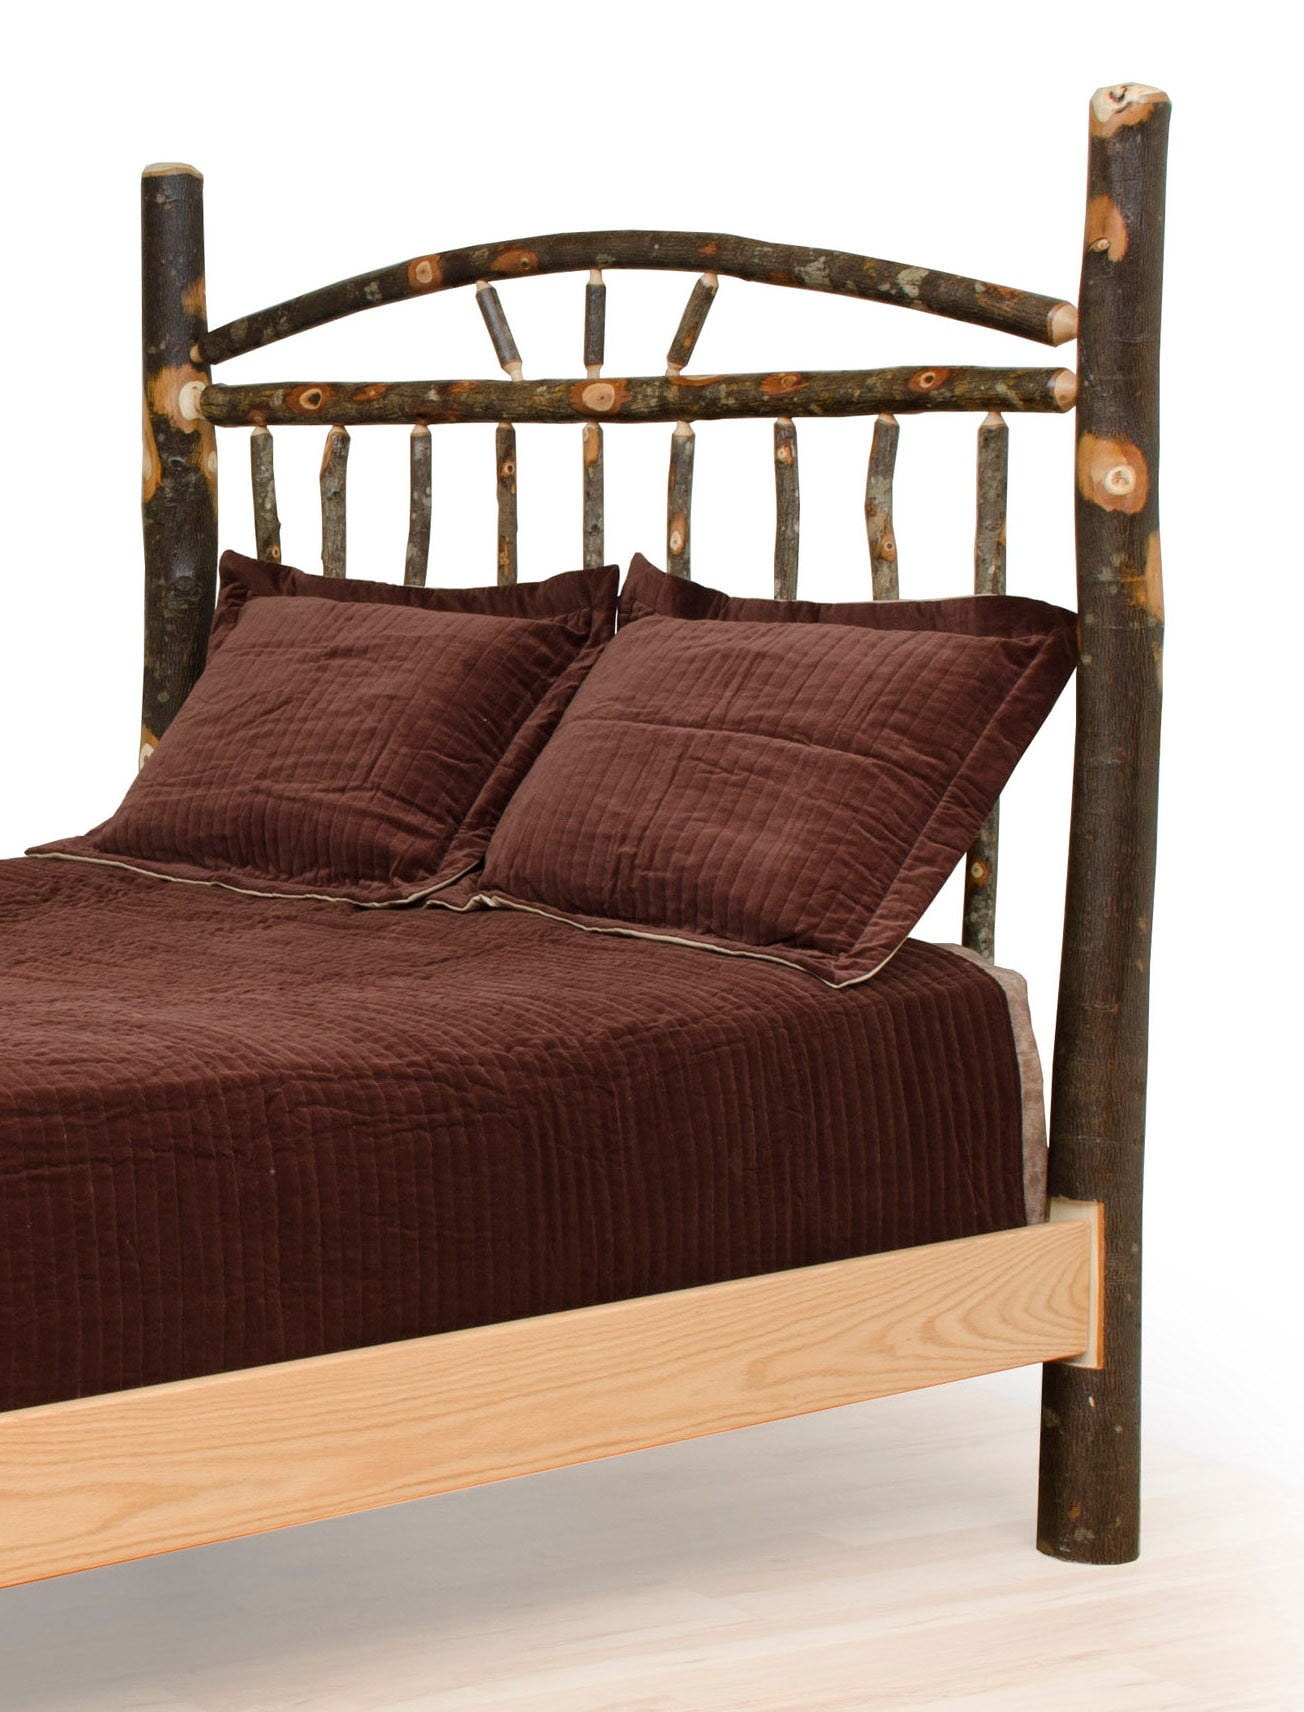 Rustic Hickory Wagon Wheel Headboard Only – Twin / Full / Queen / King